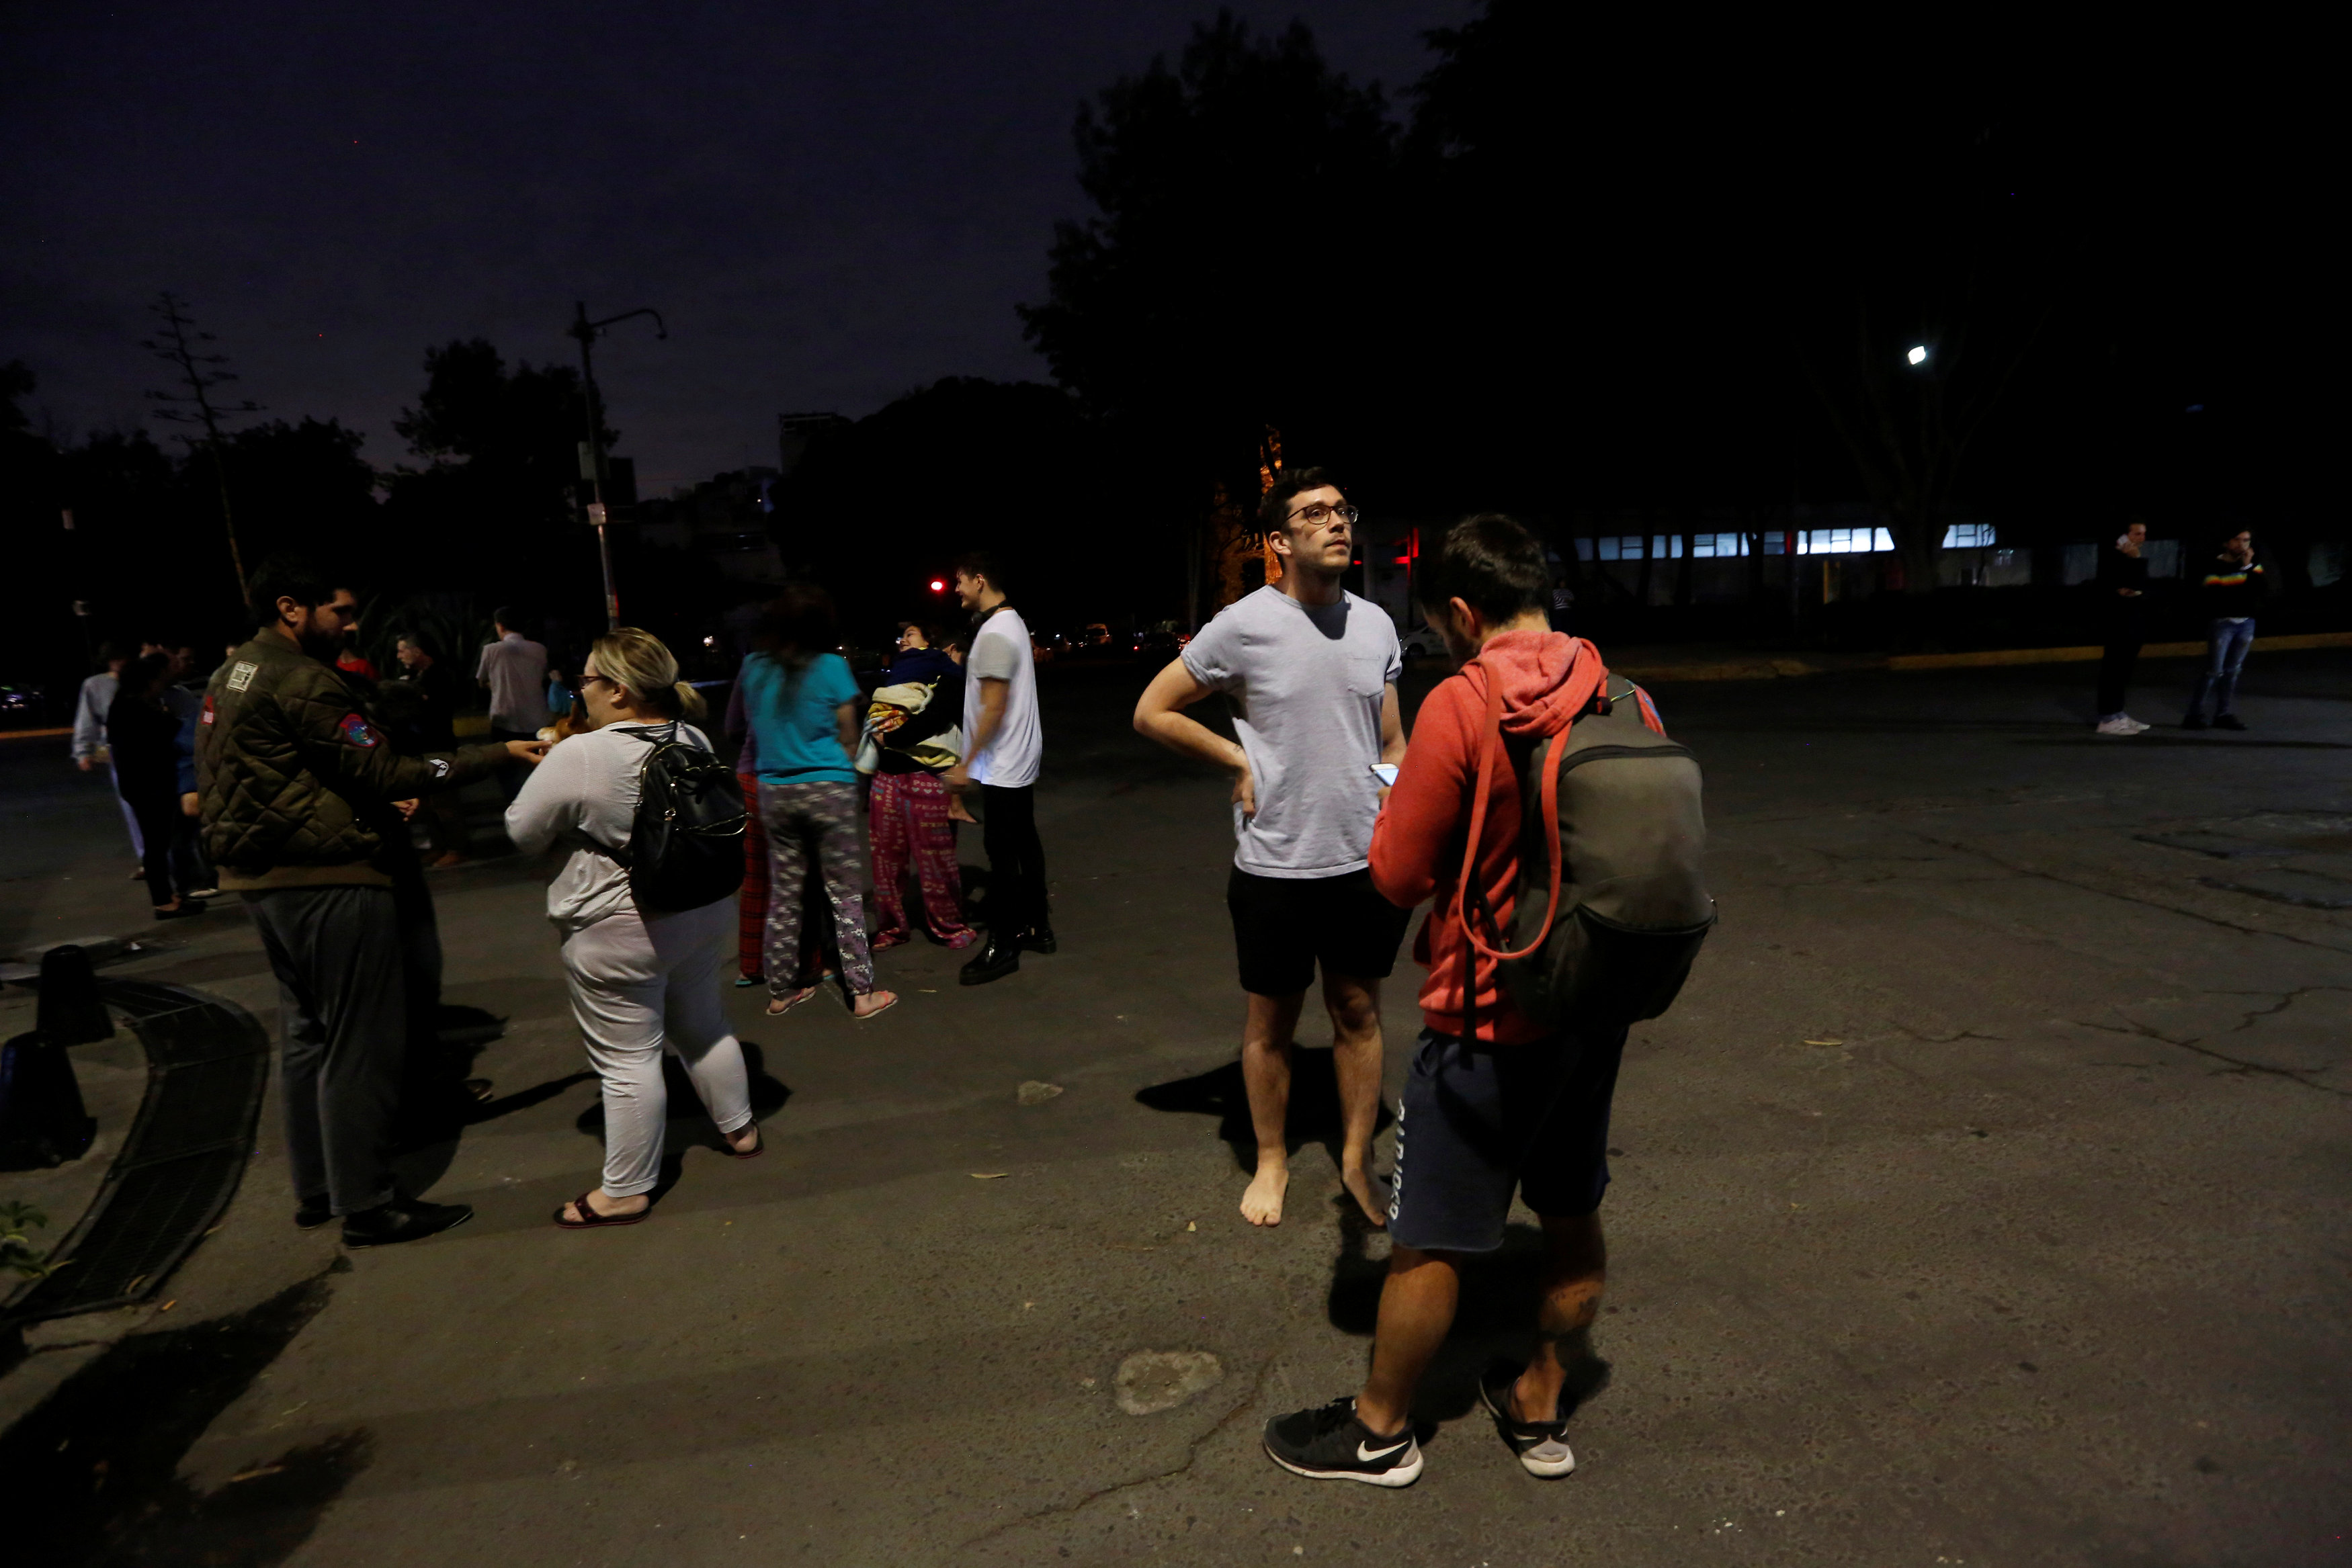 People gather on a street after an earthquake hit Mexico City, Mexico late Sept. 7, 2017. (REUTERS/Claudia Daut)